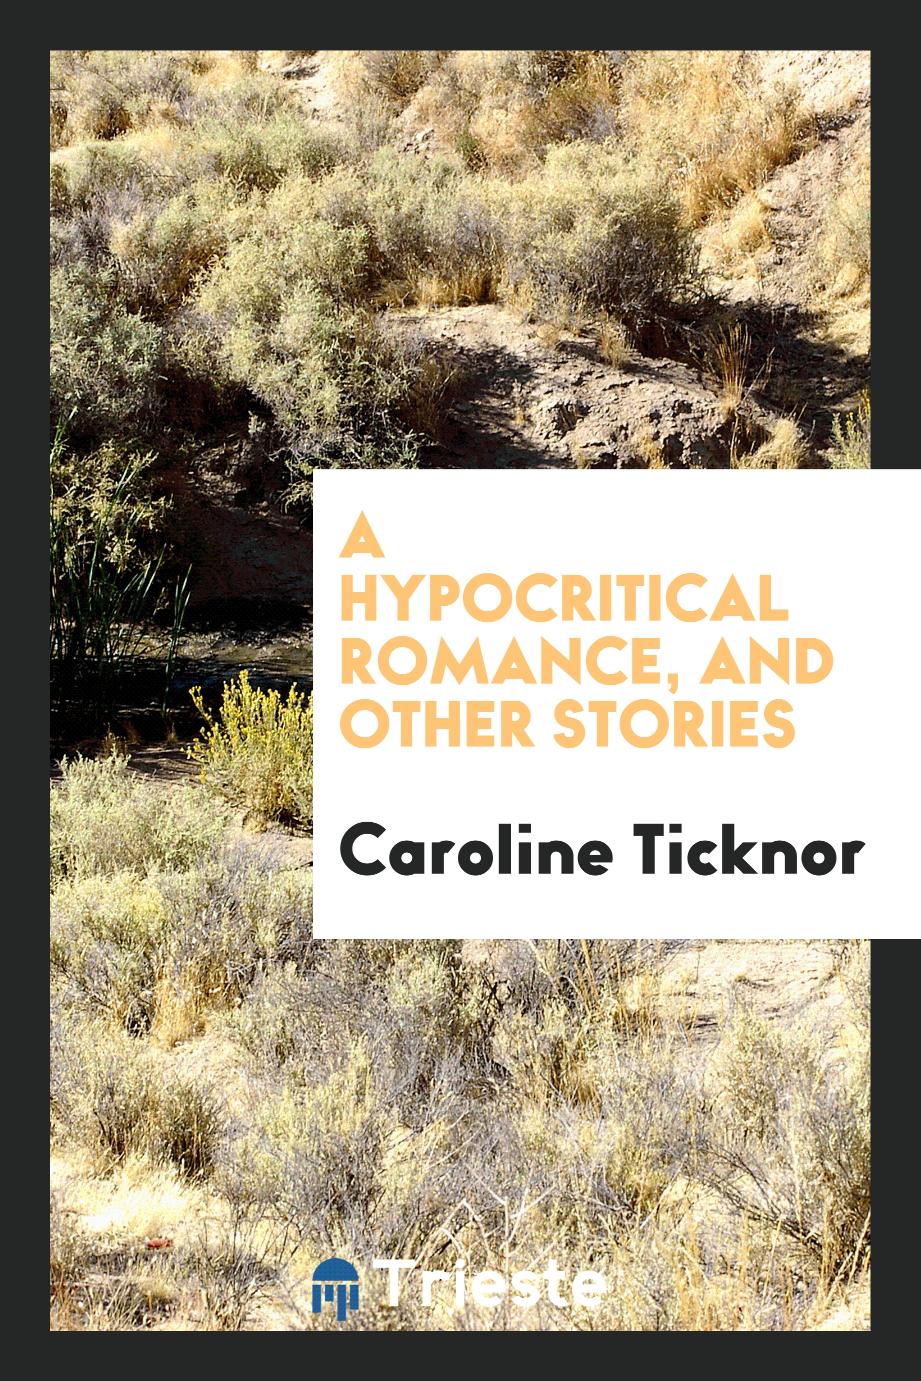 A Hypocritical Romance, and Other Stories